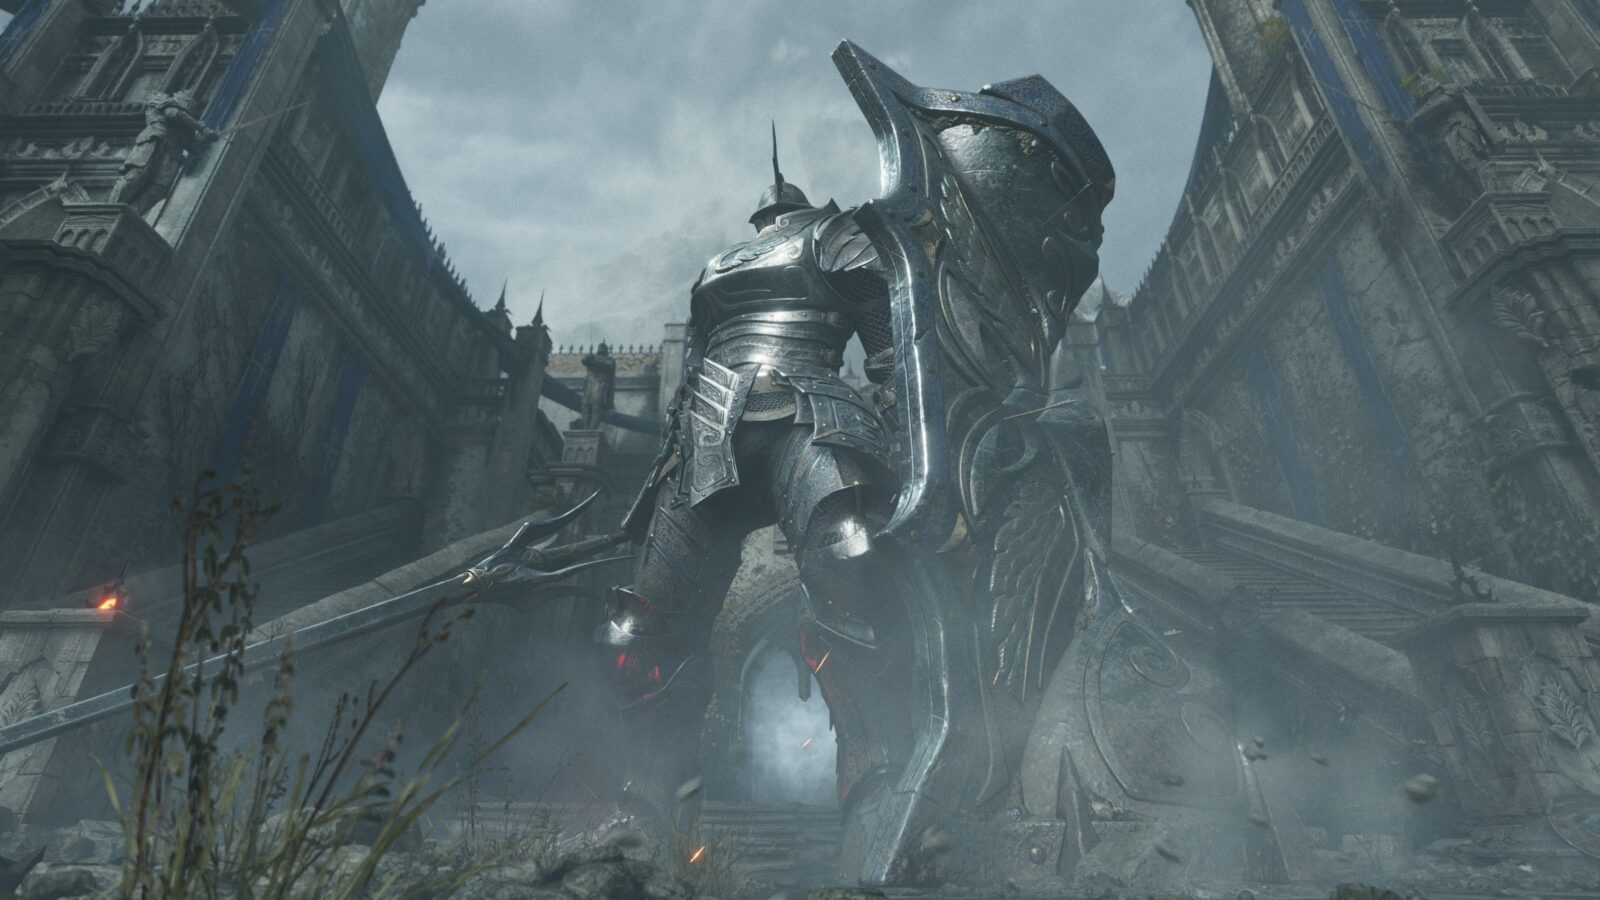 Demon's Souls, How To Beat Tower Knight